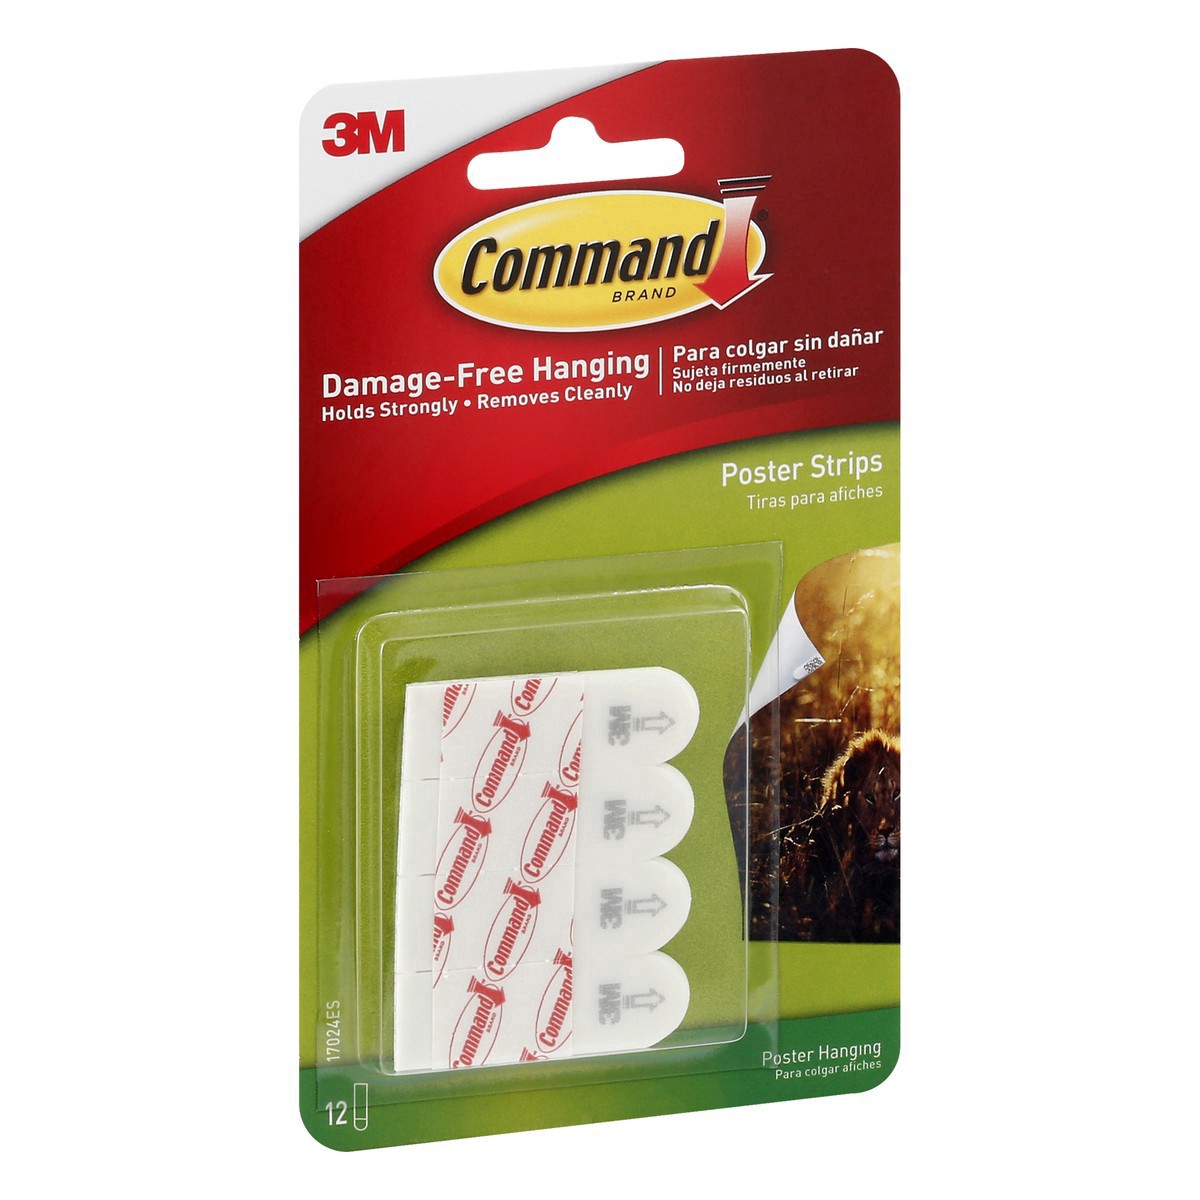 slide 5 of 10, 3M Command Poster Damage-Free Hanging Strips, 12 ct